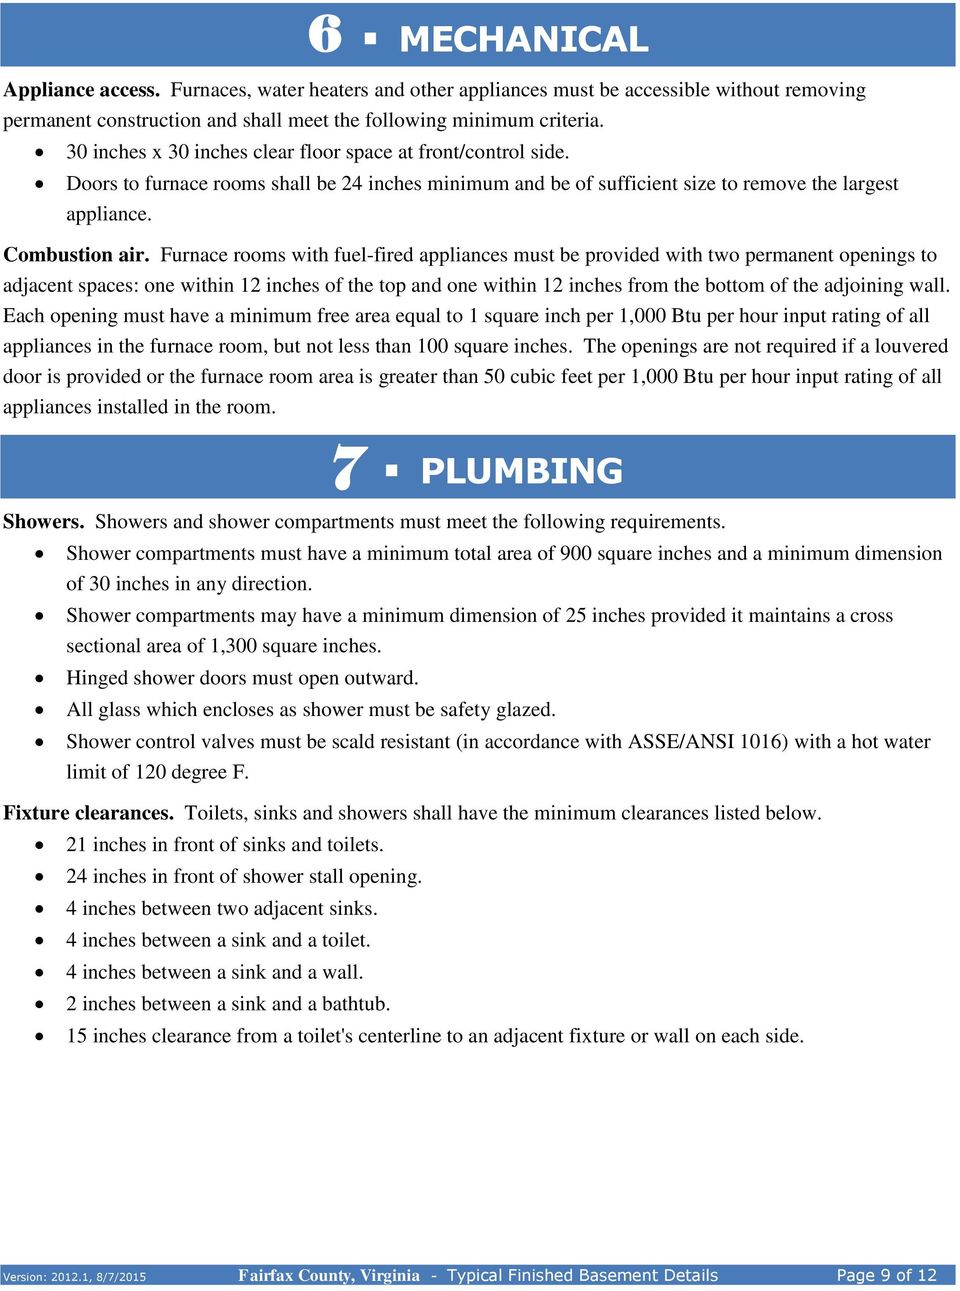 Furnace rooms with fuel-fired appliances must be provided with two permanent openings to adjacent spaces: one within 12 inches of the top and one within 12 inches from the bottom of the adjoining